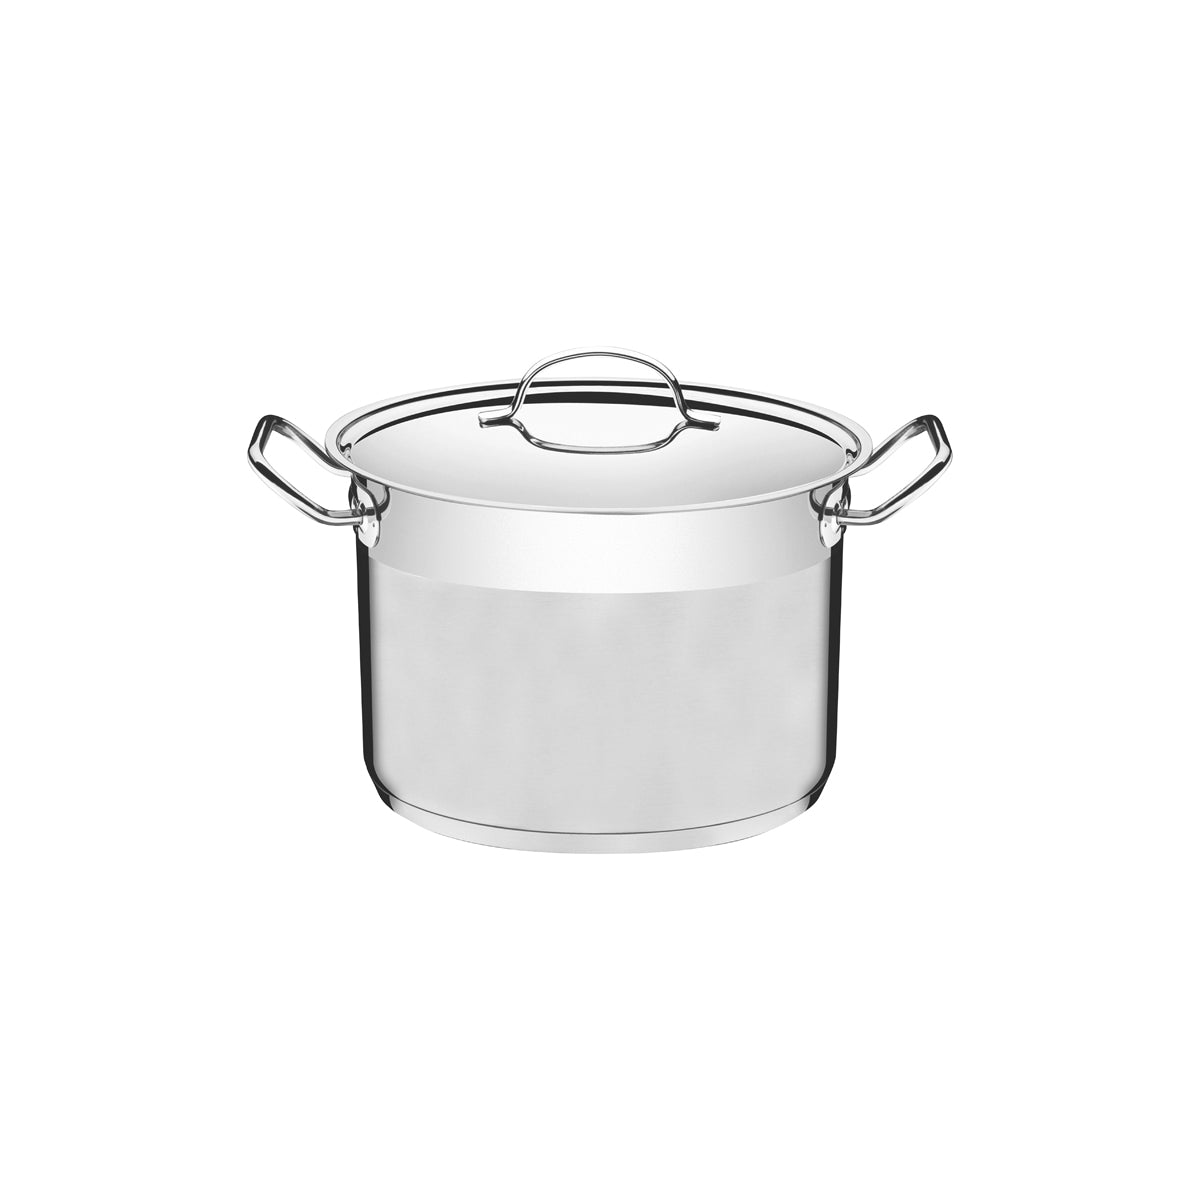 TM62625/281 Tramontina Professional Stock Pot with Lid Stainless Steel 280mm Tomkin Australia Hospitality Supplies